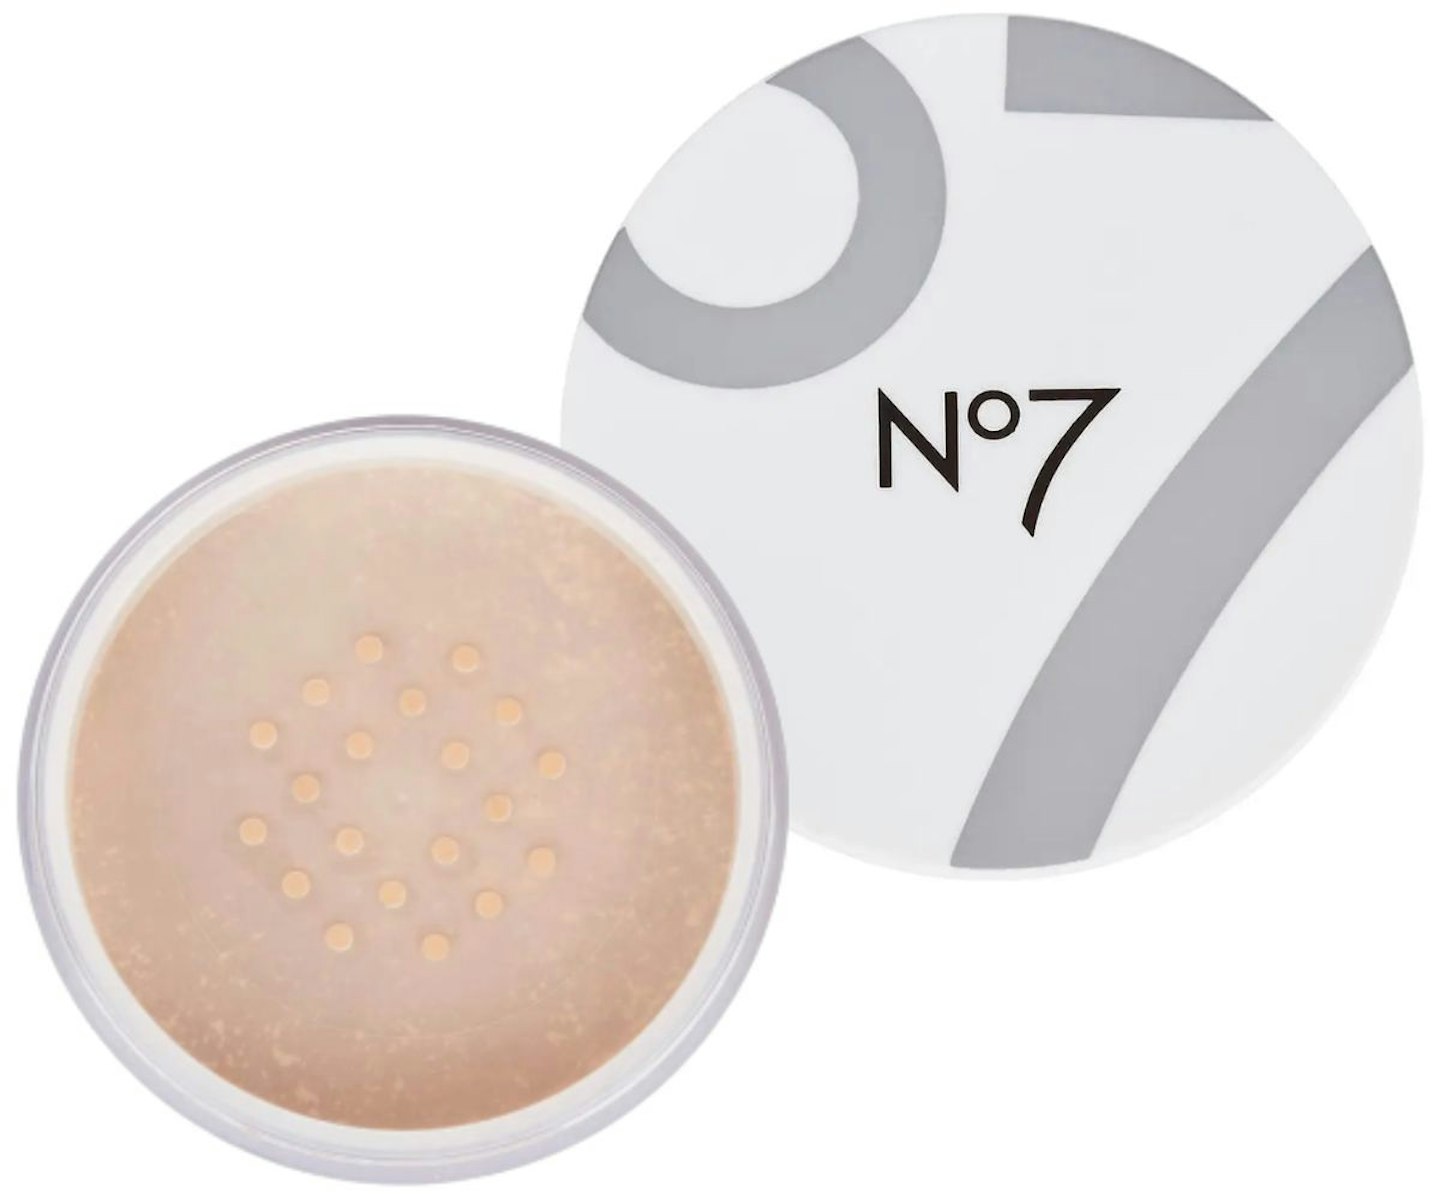 No7 Mineral Perfection Powder Foundation